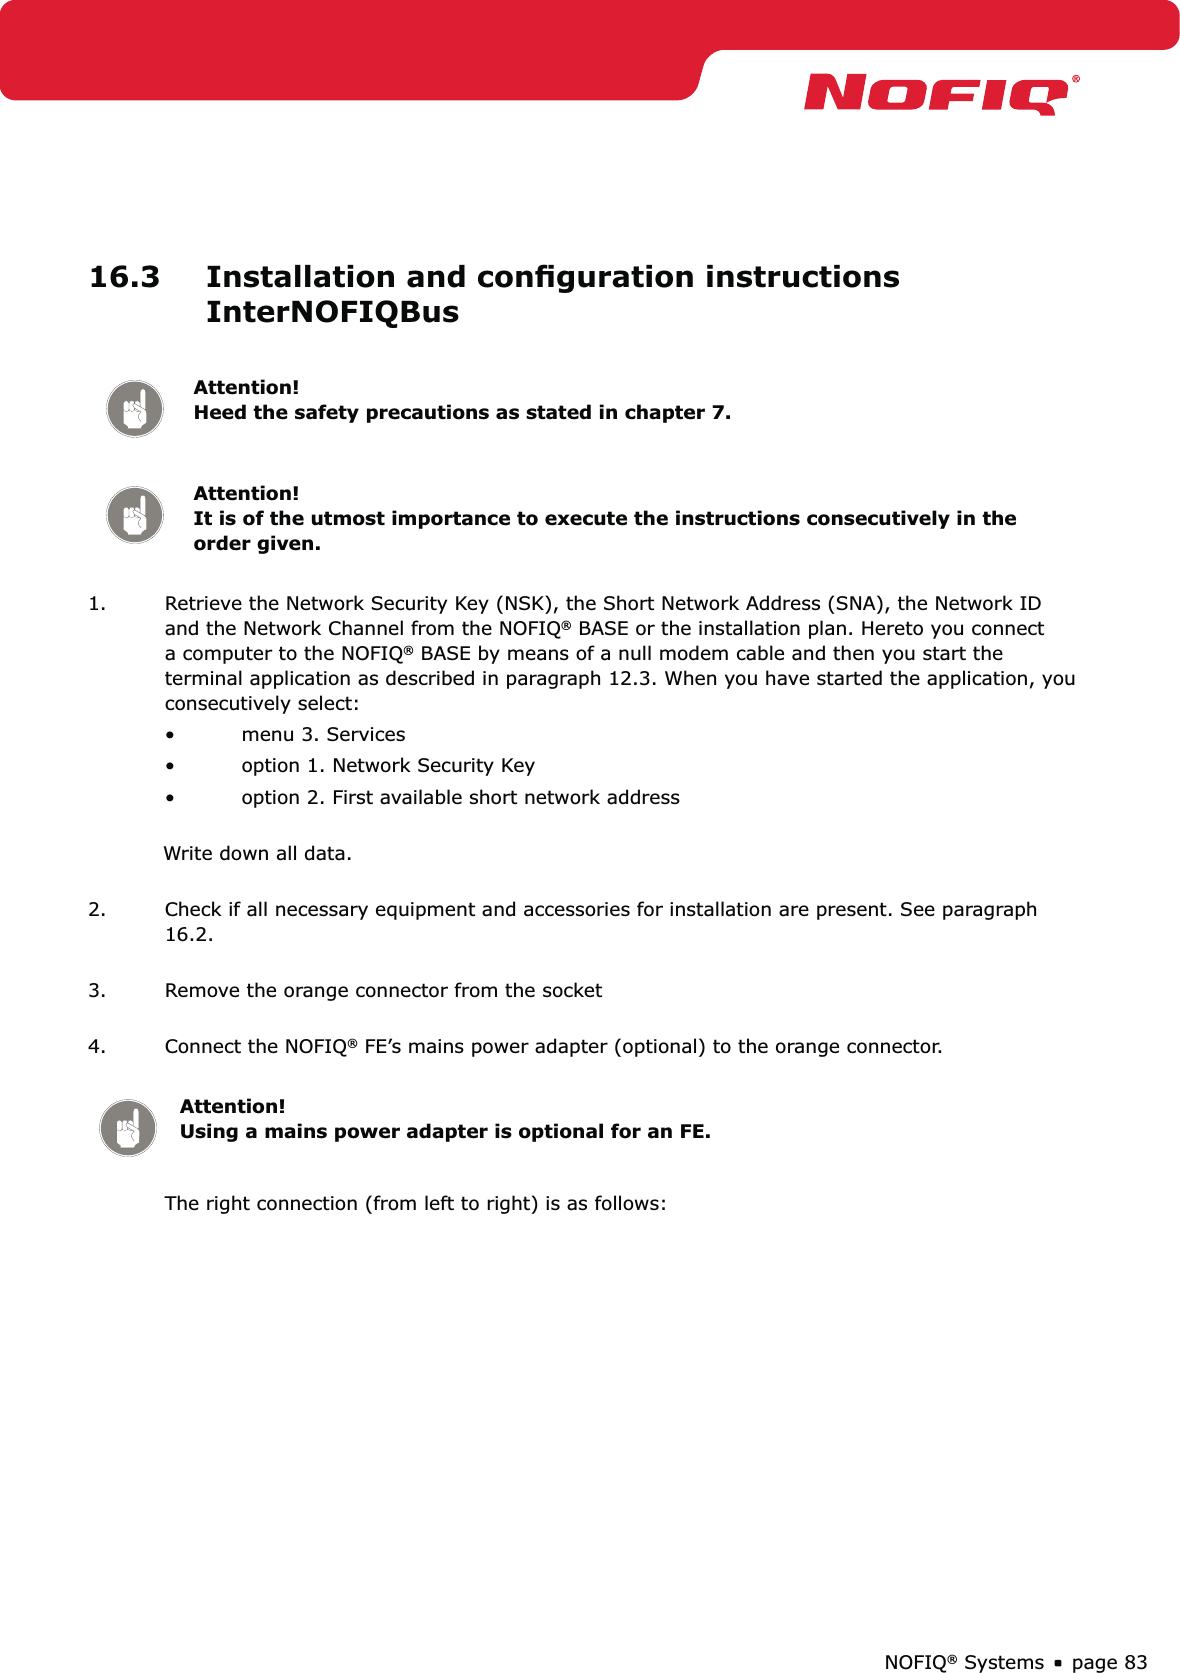 page 83NOFIQ® Systems16.3  Installation and conﬁguration instructions InterNOFIQBusAttention! Heed the safety precautions as stated in chapter 7.Attention! It is of the utmost importance to execute the instructions consecutively in the order given.1.  Retrieve the Network Security Key (NSK), the Short Network Address (SNA), the Network ID and the Network Channel from the NOFIQ® BASE or the installation plan. Hereto you connect a computer to the NOFIQ® BASE by means of a null modem cable and then you start the terminal application as described in paragraph 12.3. When you have started the application, you consecutively select:menu 3. Services• option 1. Network Security Key• option 2. First available short network address • Write down all data. 2.  Check if all necessary equipment and accessories for installation are present. See paragraph 16.2. 3.  Remove the orange connector from the socket 4.  Connect the NOFIQ® FE’s mains power adapter (optional) to the orange connector.  Attention! Using a mains power adapter is optional for an FE.The right connection (from left to right) is as follows: 